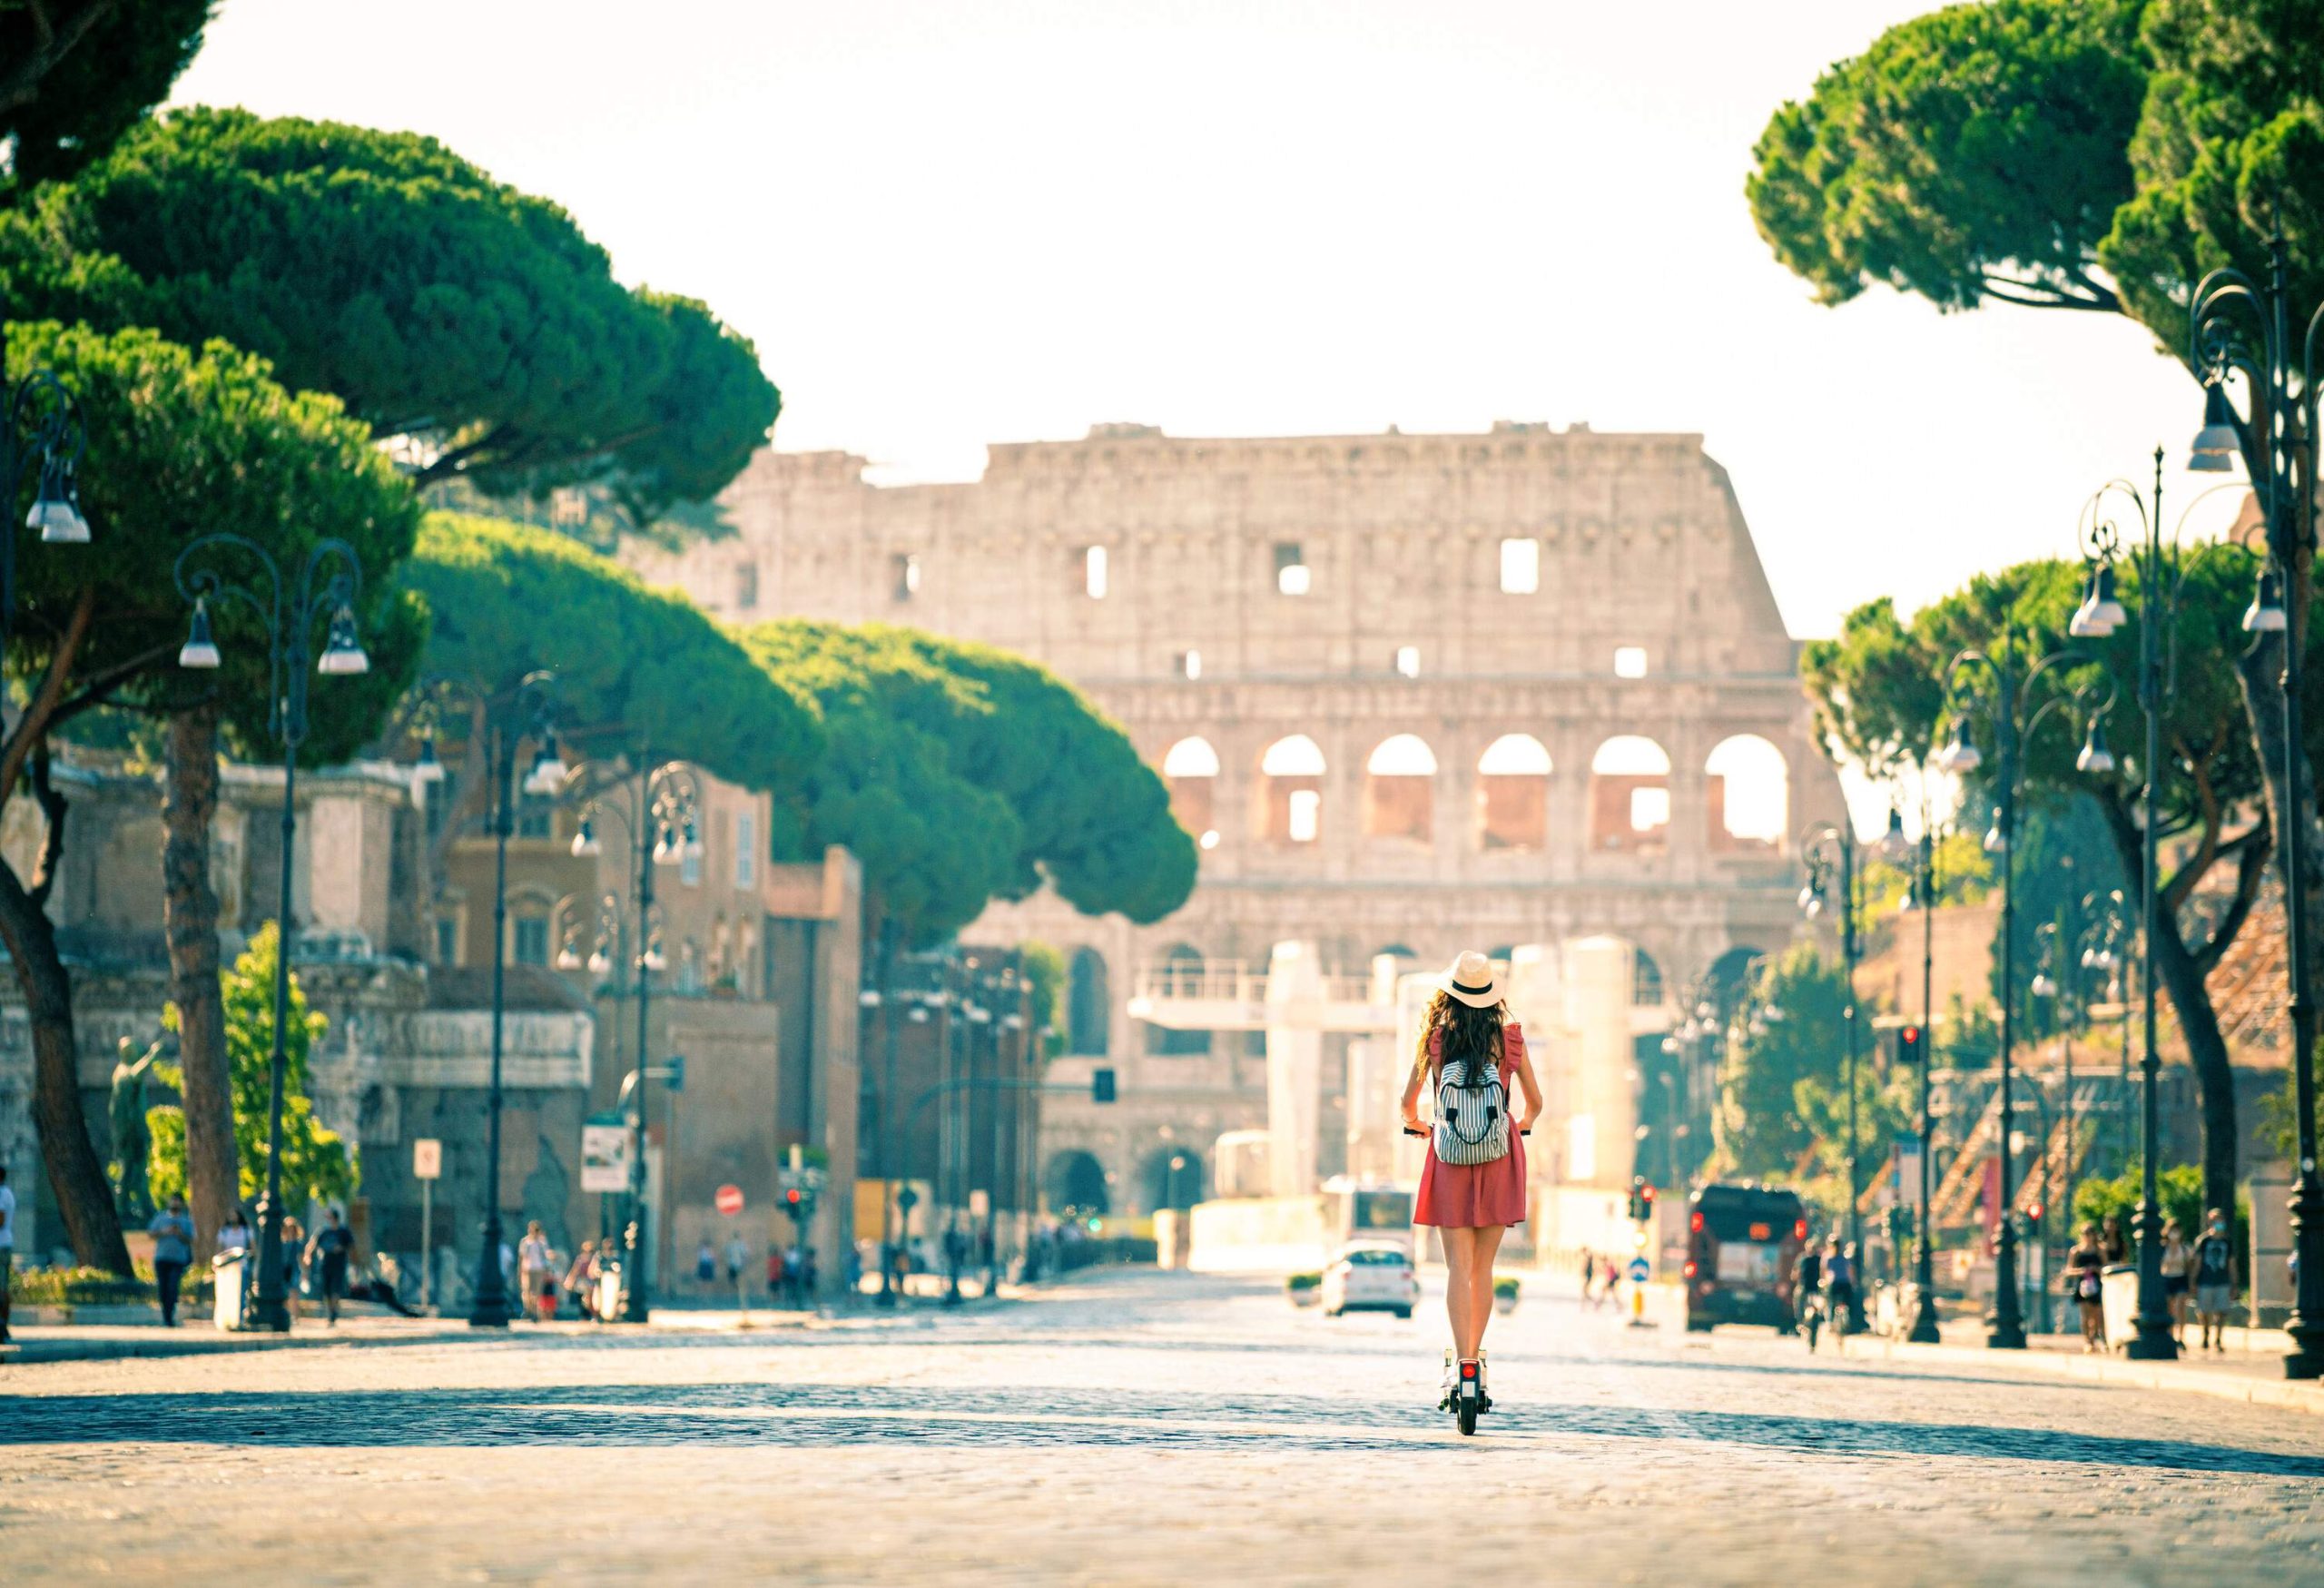 A woman in casual clothes rides an electric scooter across a tree-lined cobblestone street towards the Colosseum.